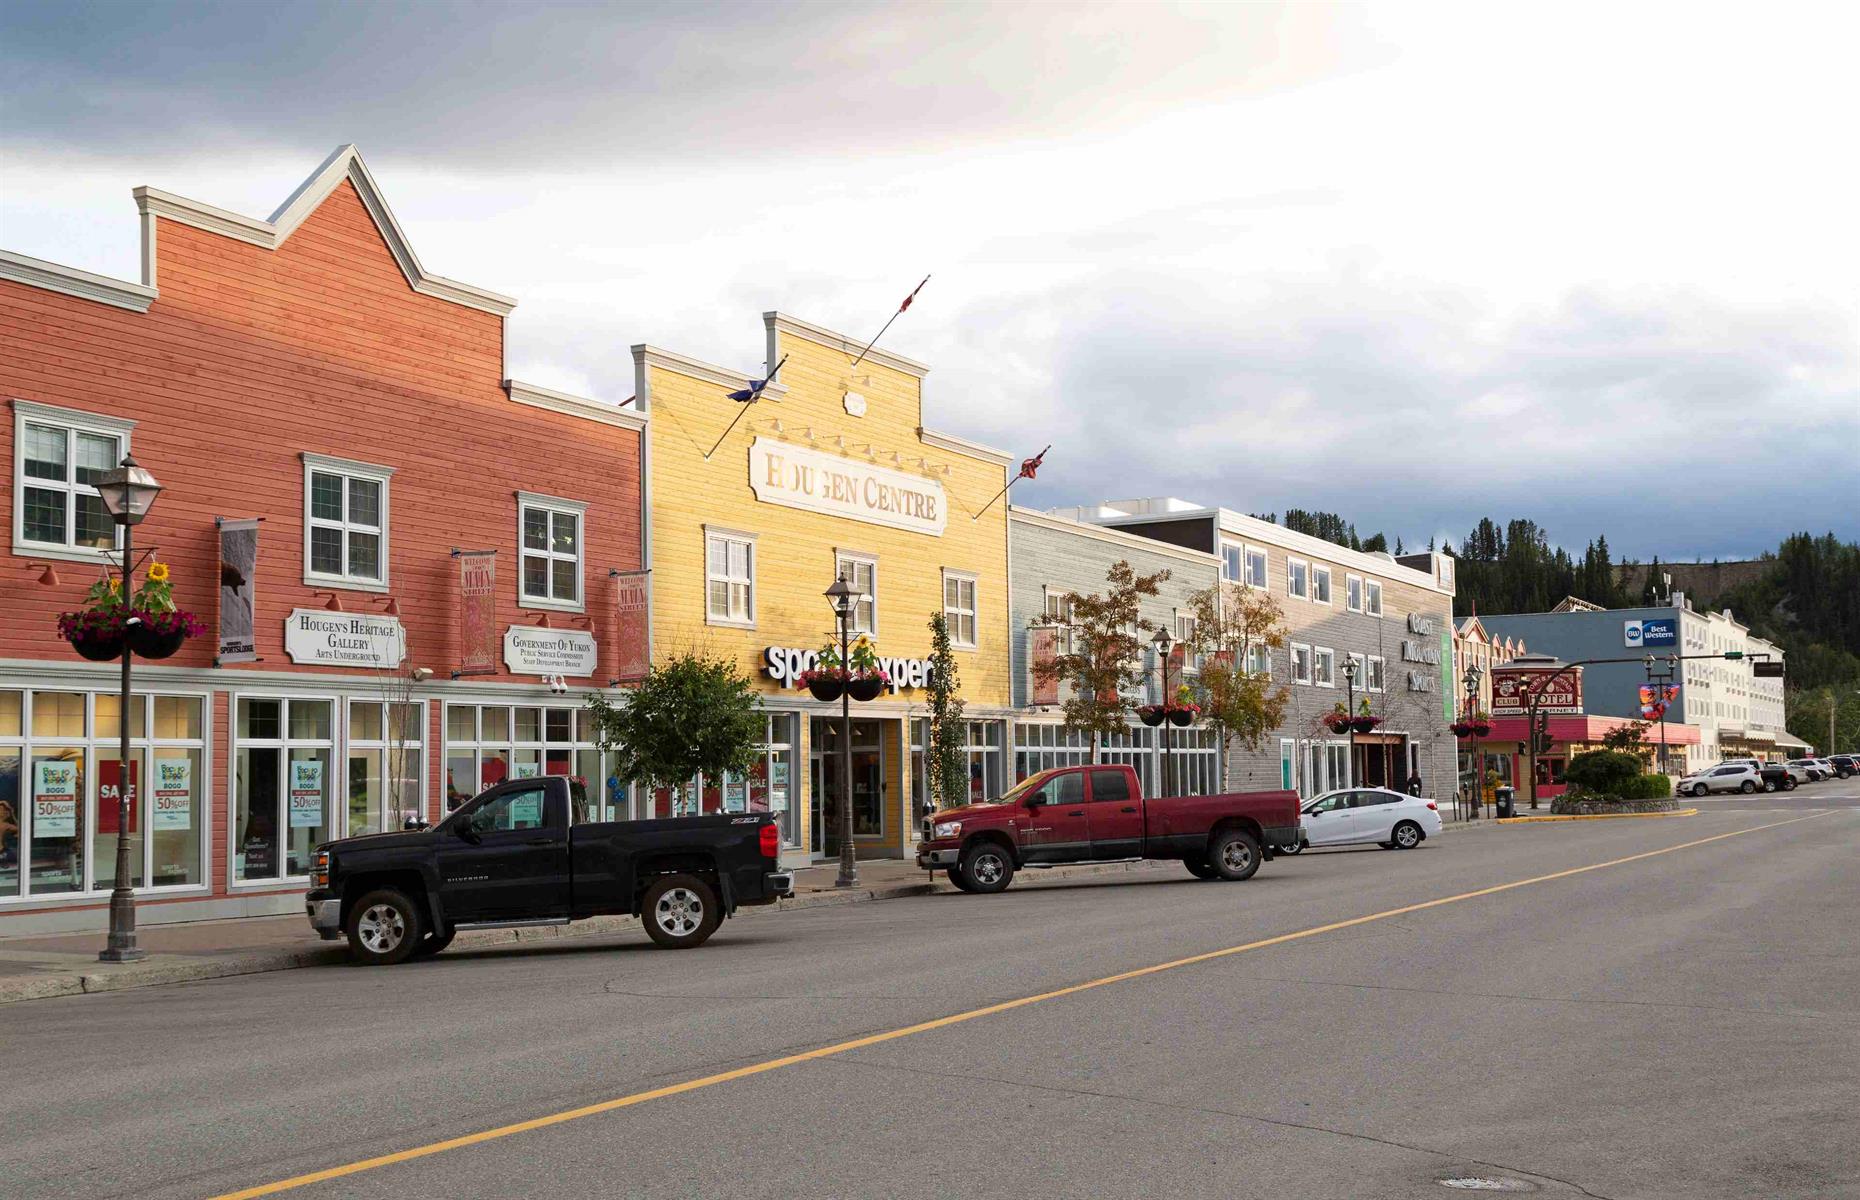 <p><a href="https://travel.destinationcanada.com/things-to-do/quick-guide-to-whitehorse">Whitehorse</a> is widely considered the most bohemian city in the Canadian north, as exhibited by its quirky downtown neighborhood. The city is surrounded by photogenic wilderness, while in the heart of town you’ll find a glut of Gold Rush history and First Nations culture, plus a Main Street full of cool wooden façades, art galleries and restaurants serving local fish and other Yukon delicacies.</p>  <p><strong><a href="https://www.loveexploring.com/galleryextended/93877/canadas-most-underrated-cities?page=1">Explore Canada's most underrated cities</a></strong></p>